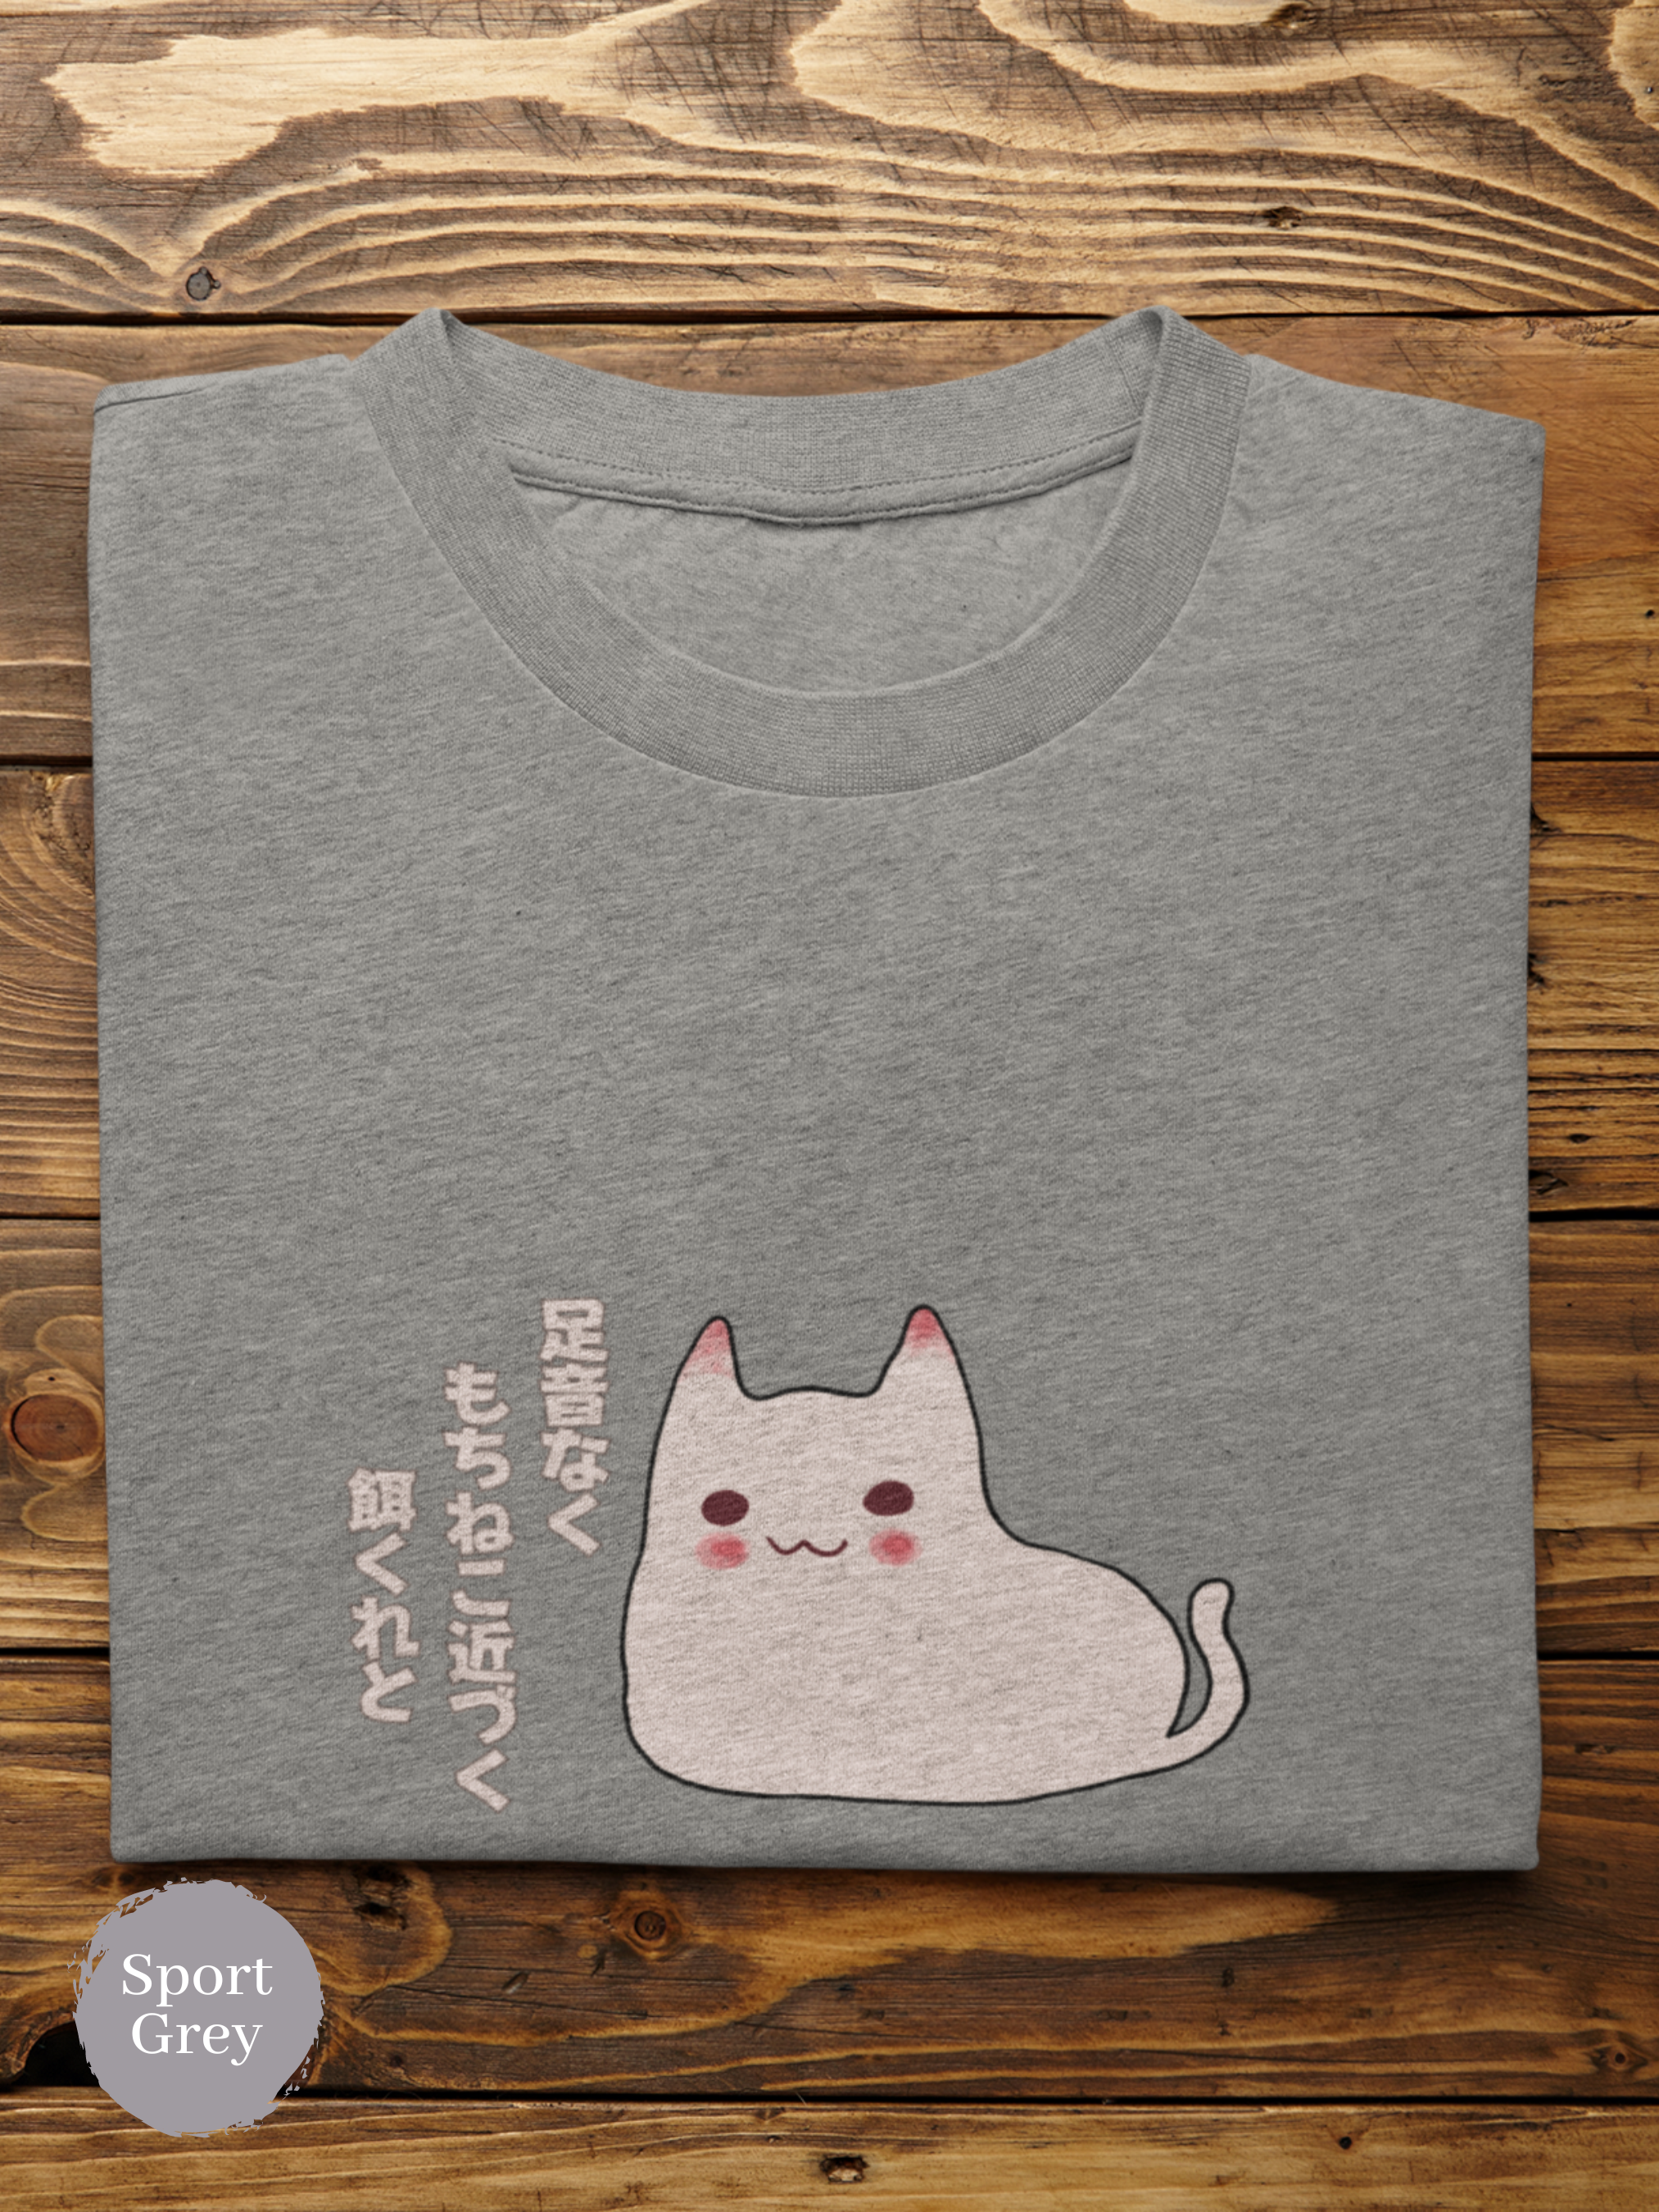 Mochi Cat T-shirt: Adorable Japanese Foodie Japanese Haiku Shirt with Cat Art Featuring the Sweet Mochi Cat